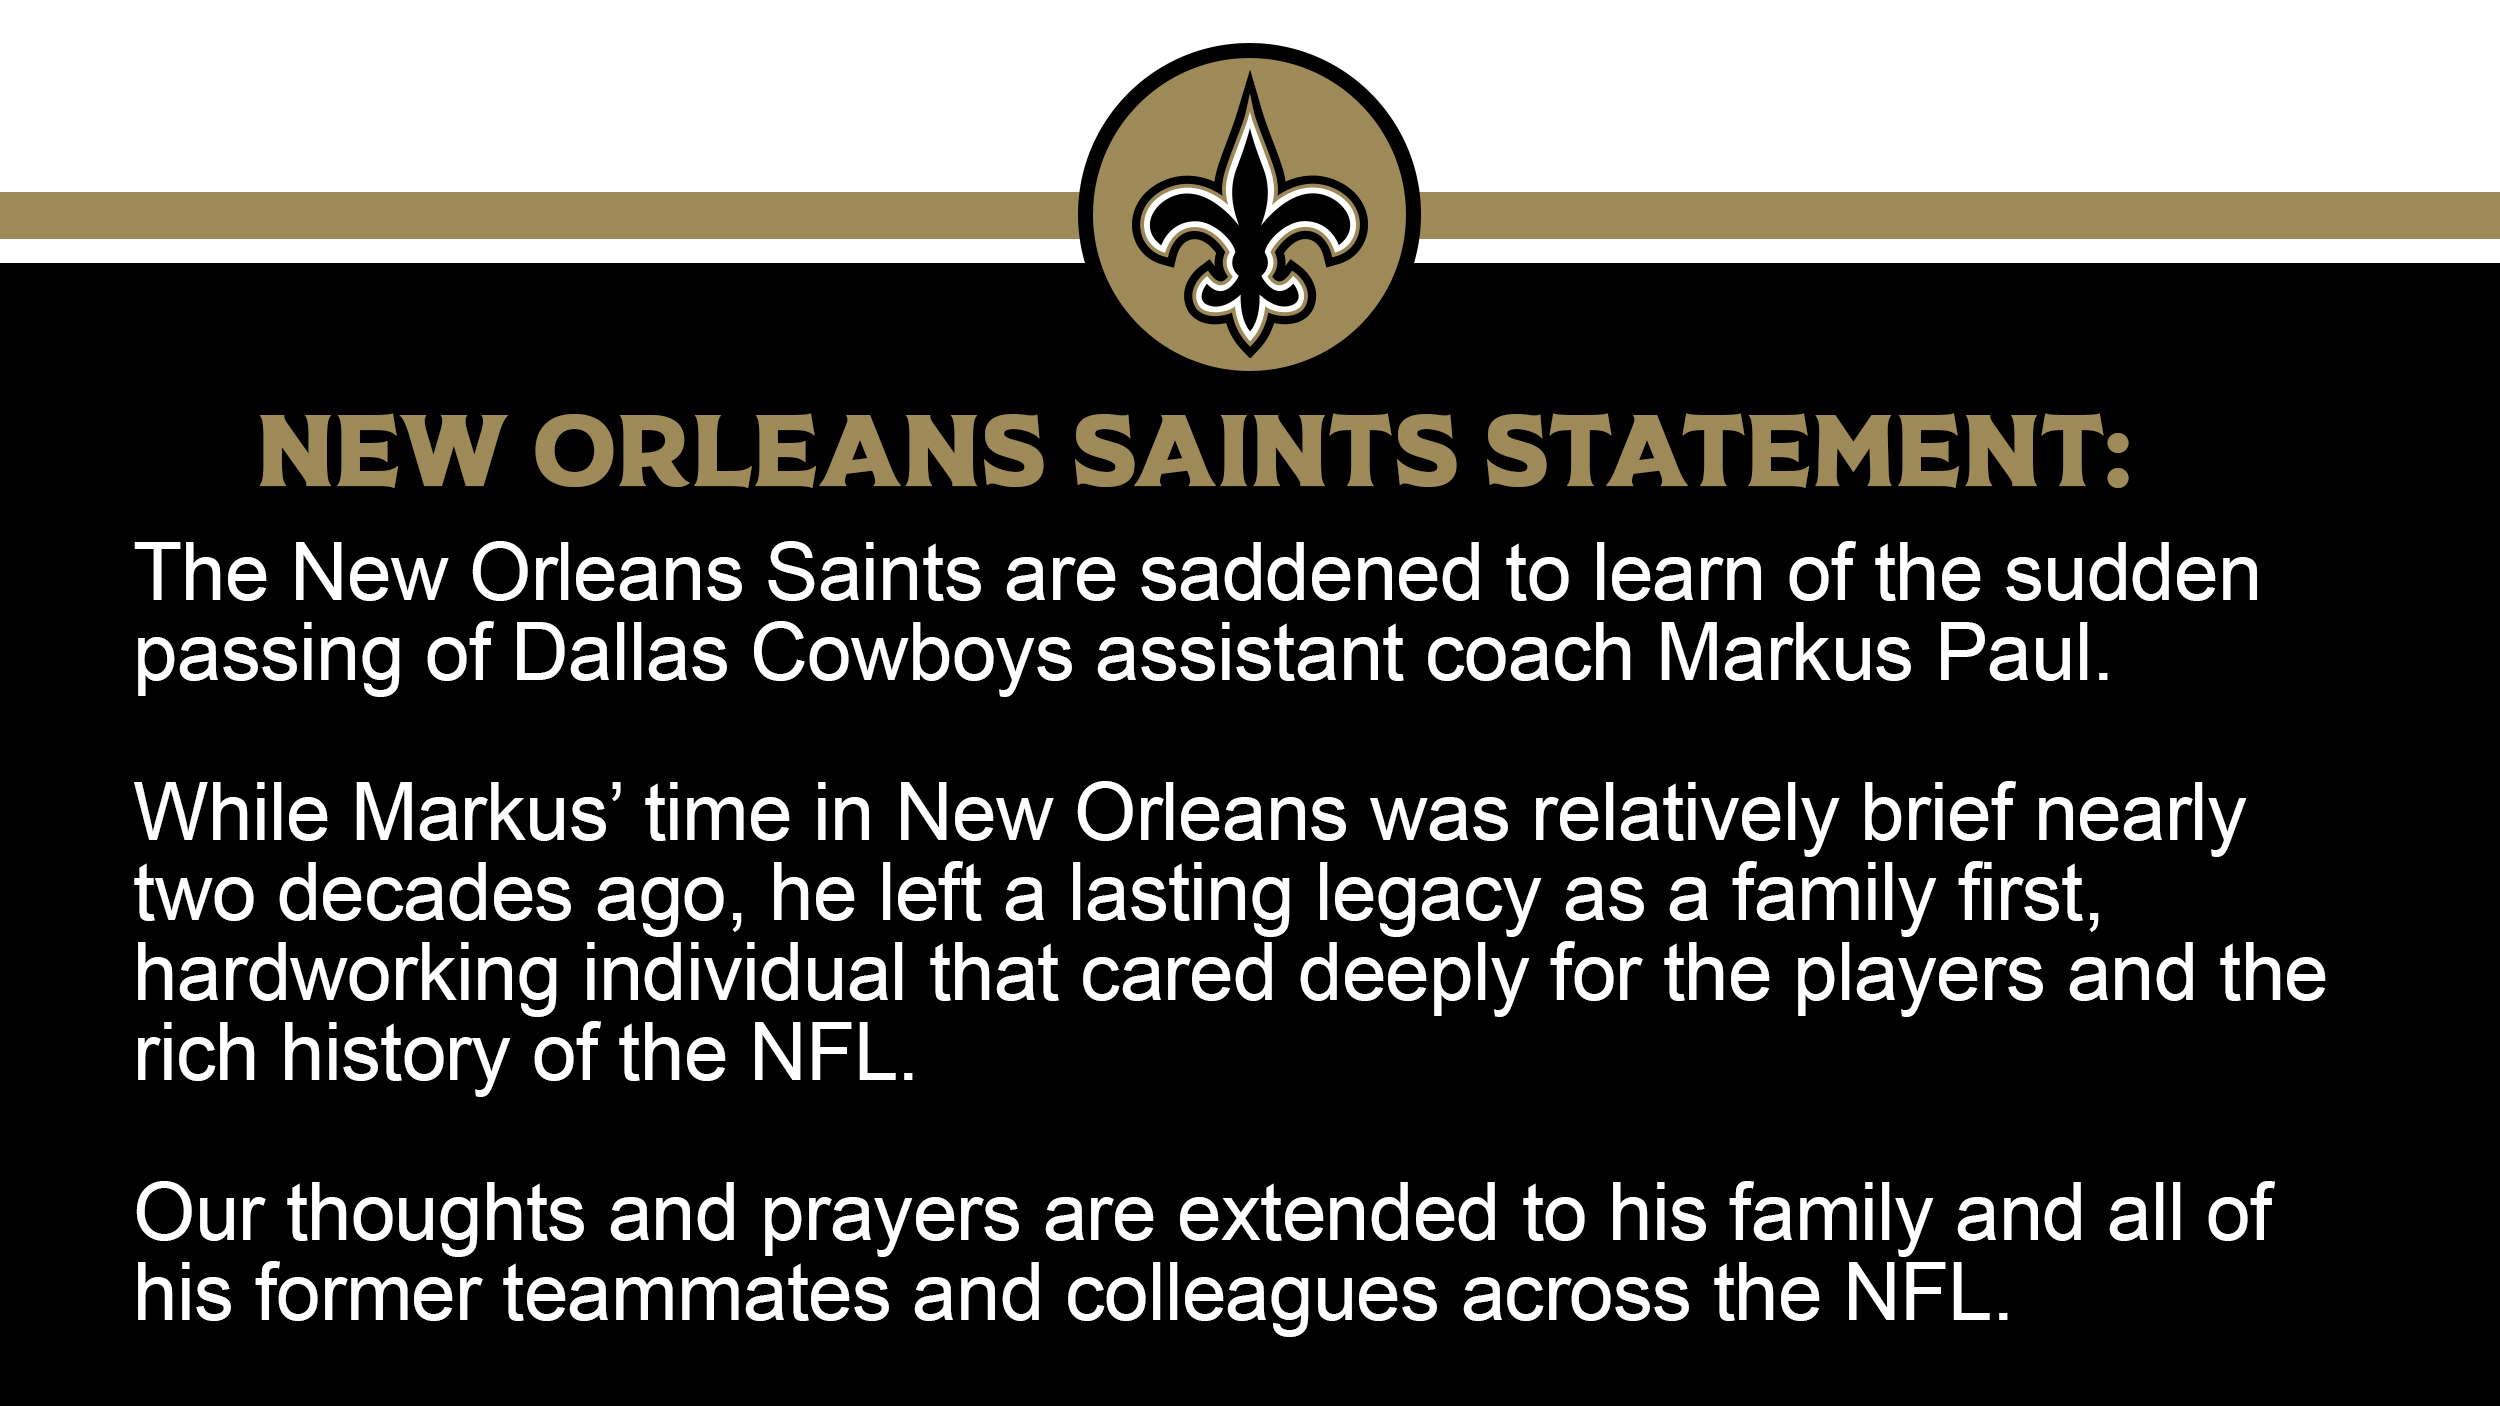 Statement from the New Orleans Saints